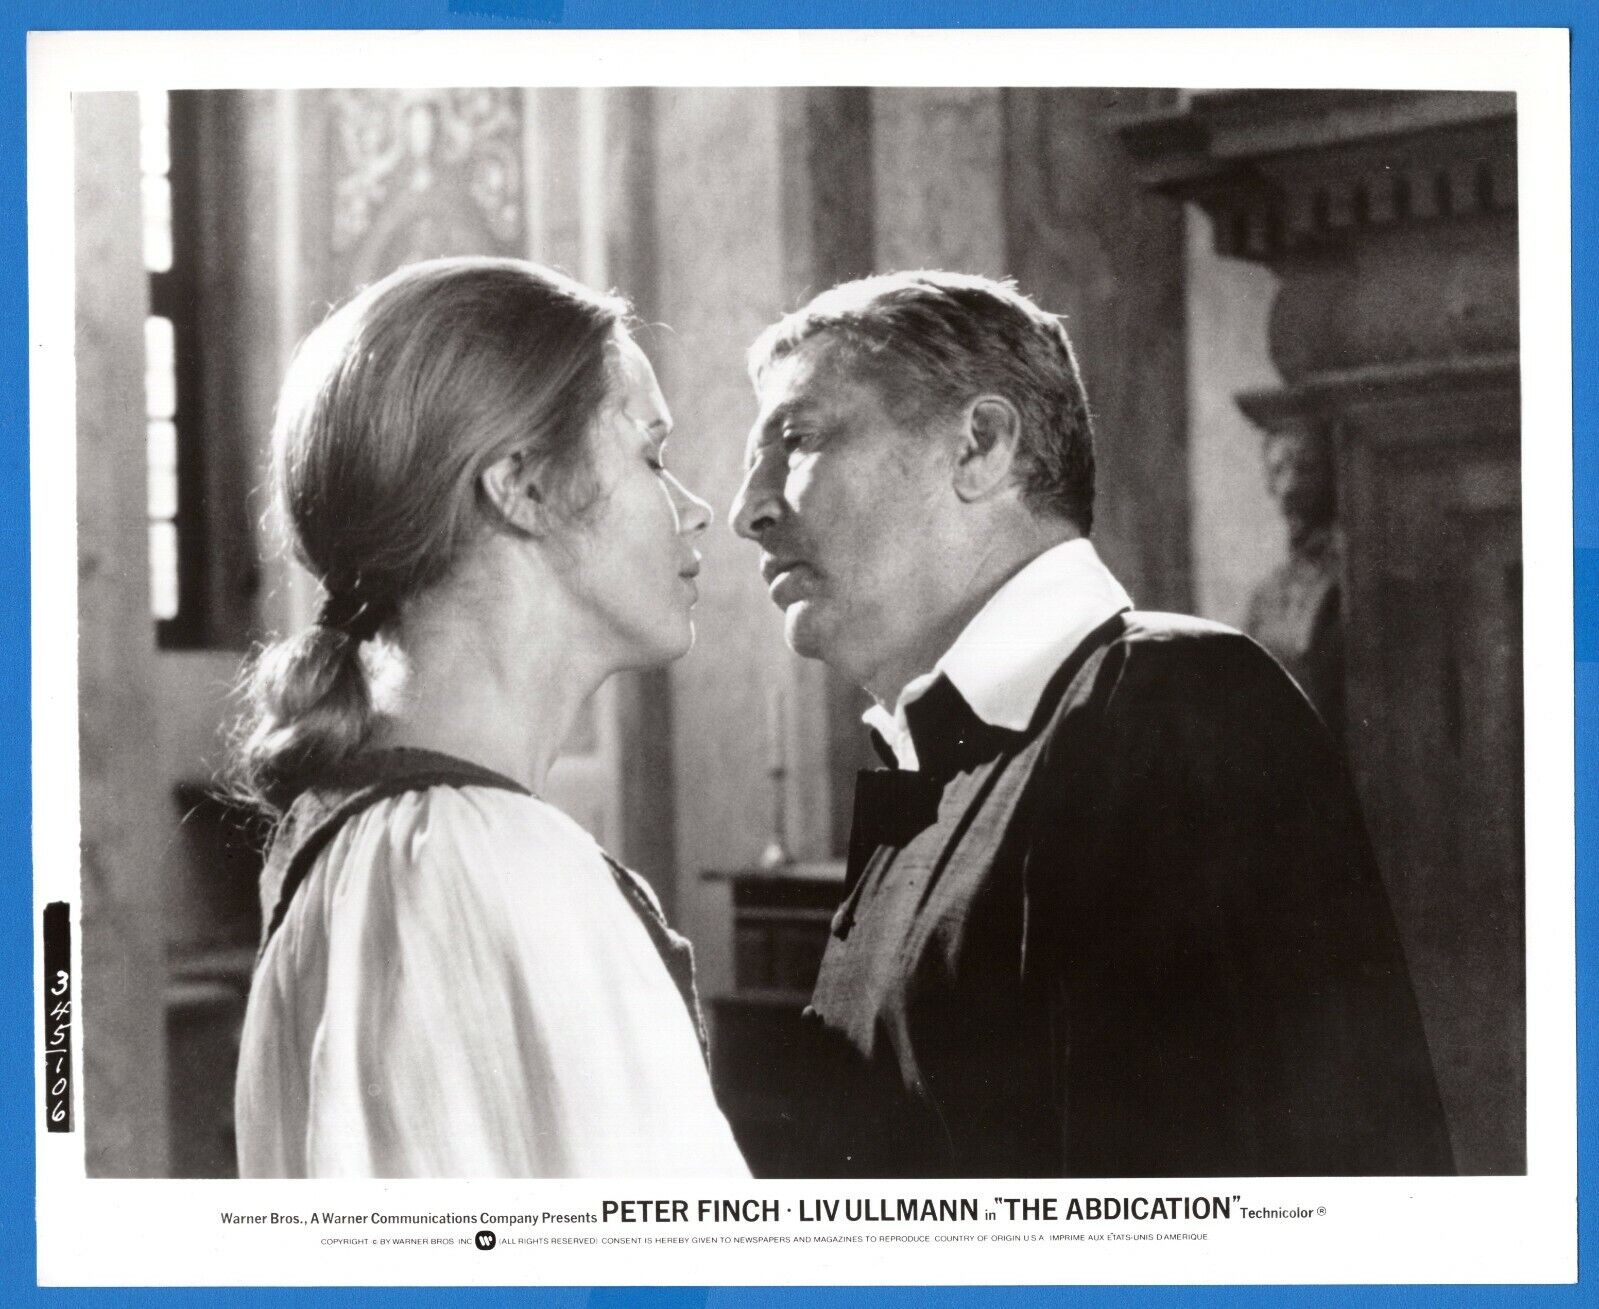 LIV ULLMANN PETER FINCH 8x10 Vintage Promo Photo Poster painting THE ABDICATION Movie 1974